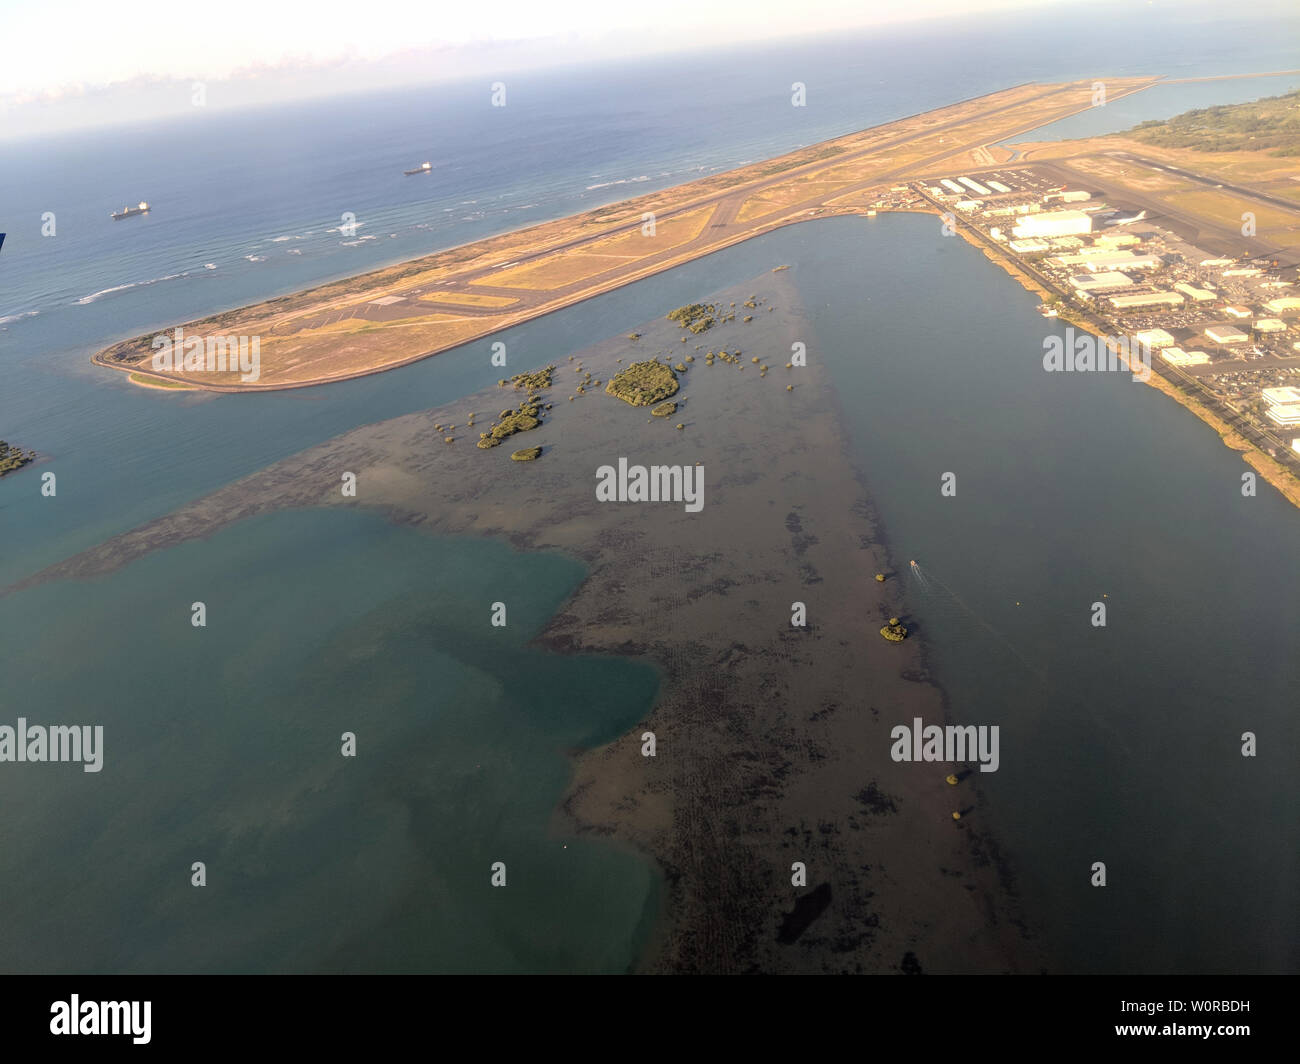 Honolulu - October 25, 2018: Aerial of Airport Reef Runway, planes and Plane hangers at Honolulu International Airport during the day with boats on th Stock Photo